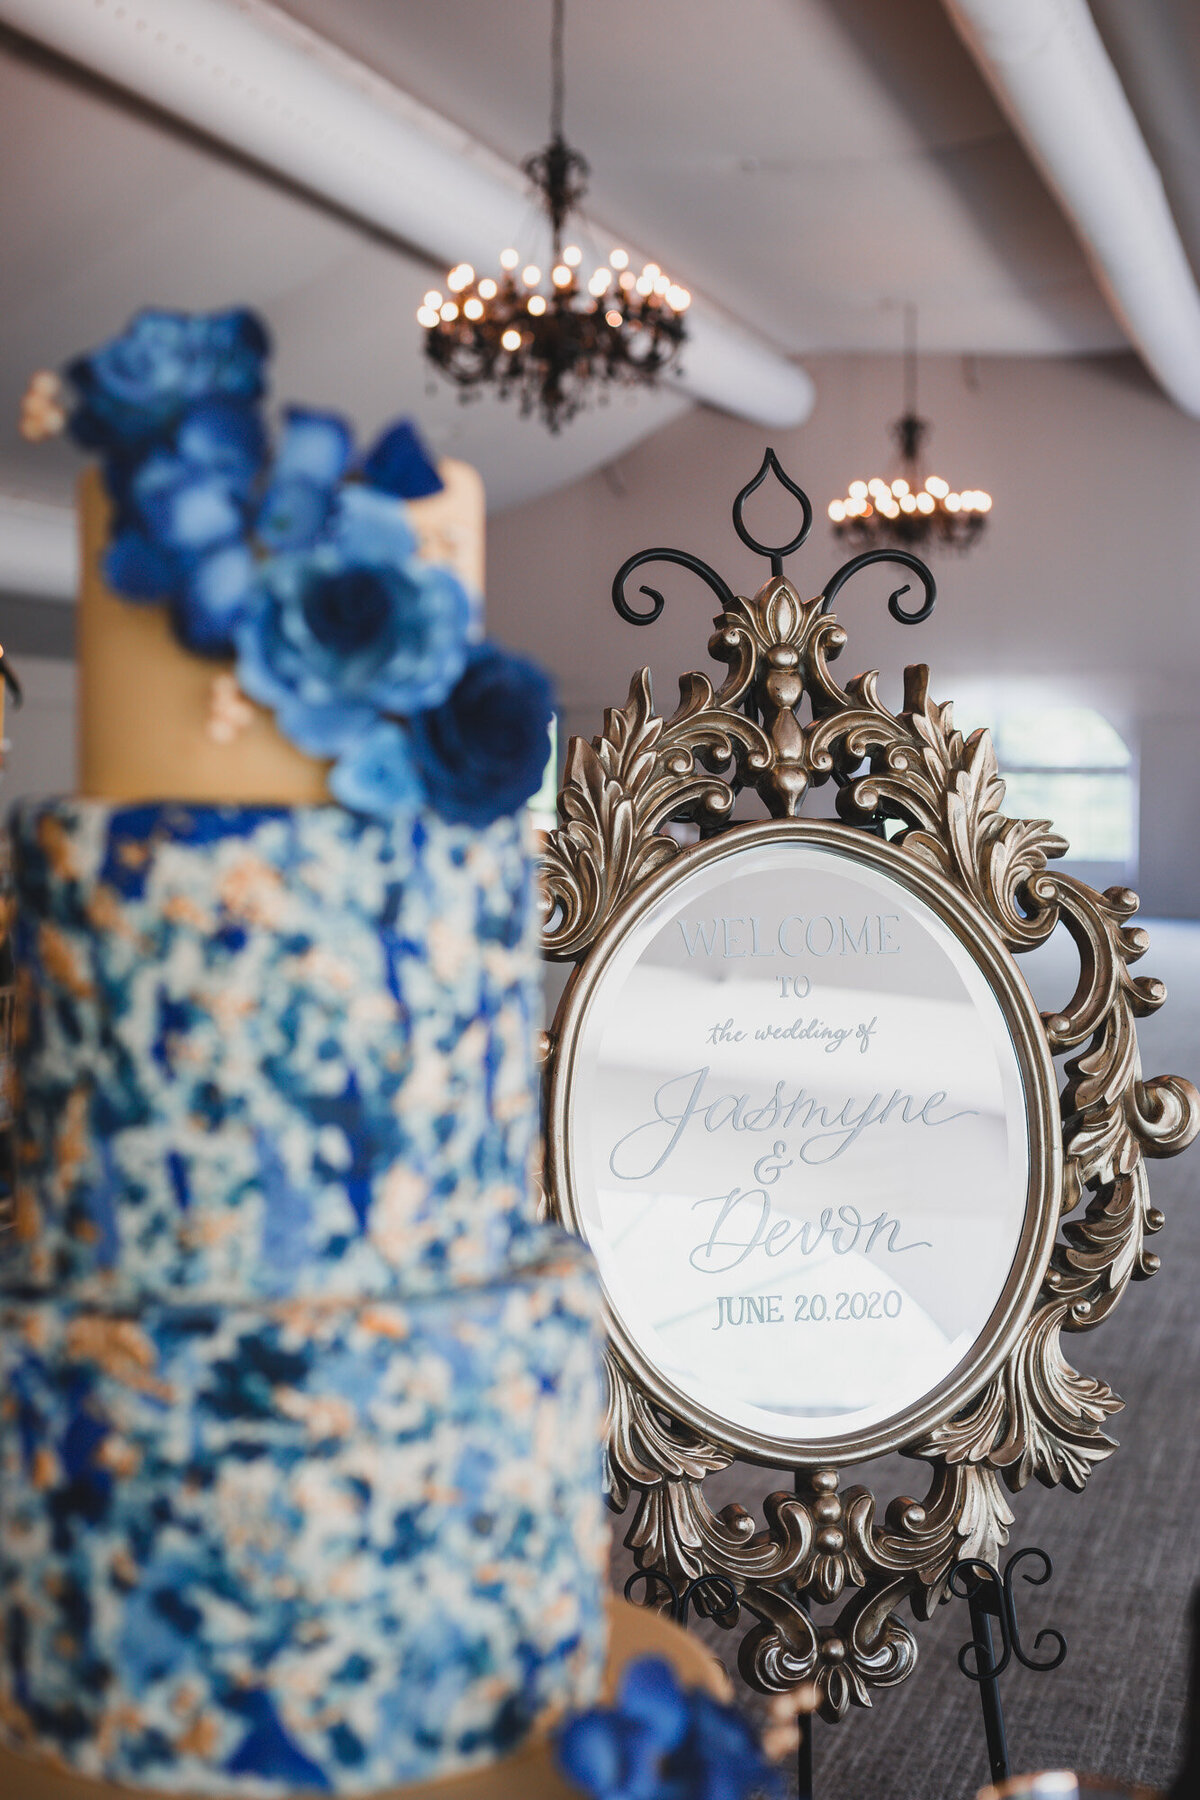 Wedding cake with blue floral details and small round mirror with wedding details